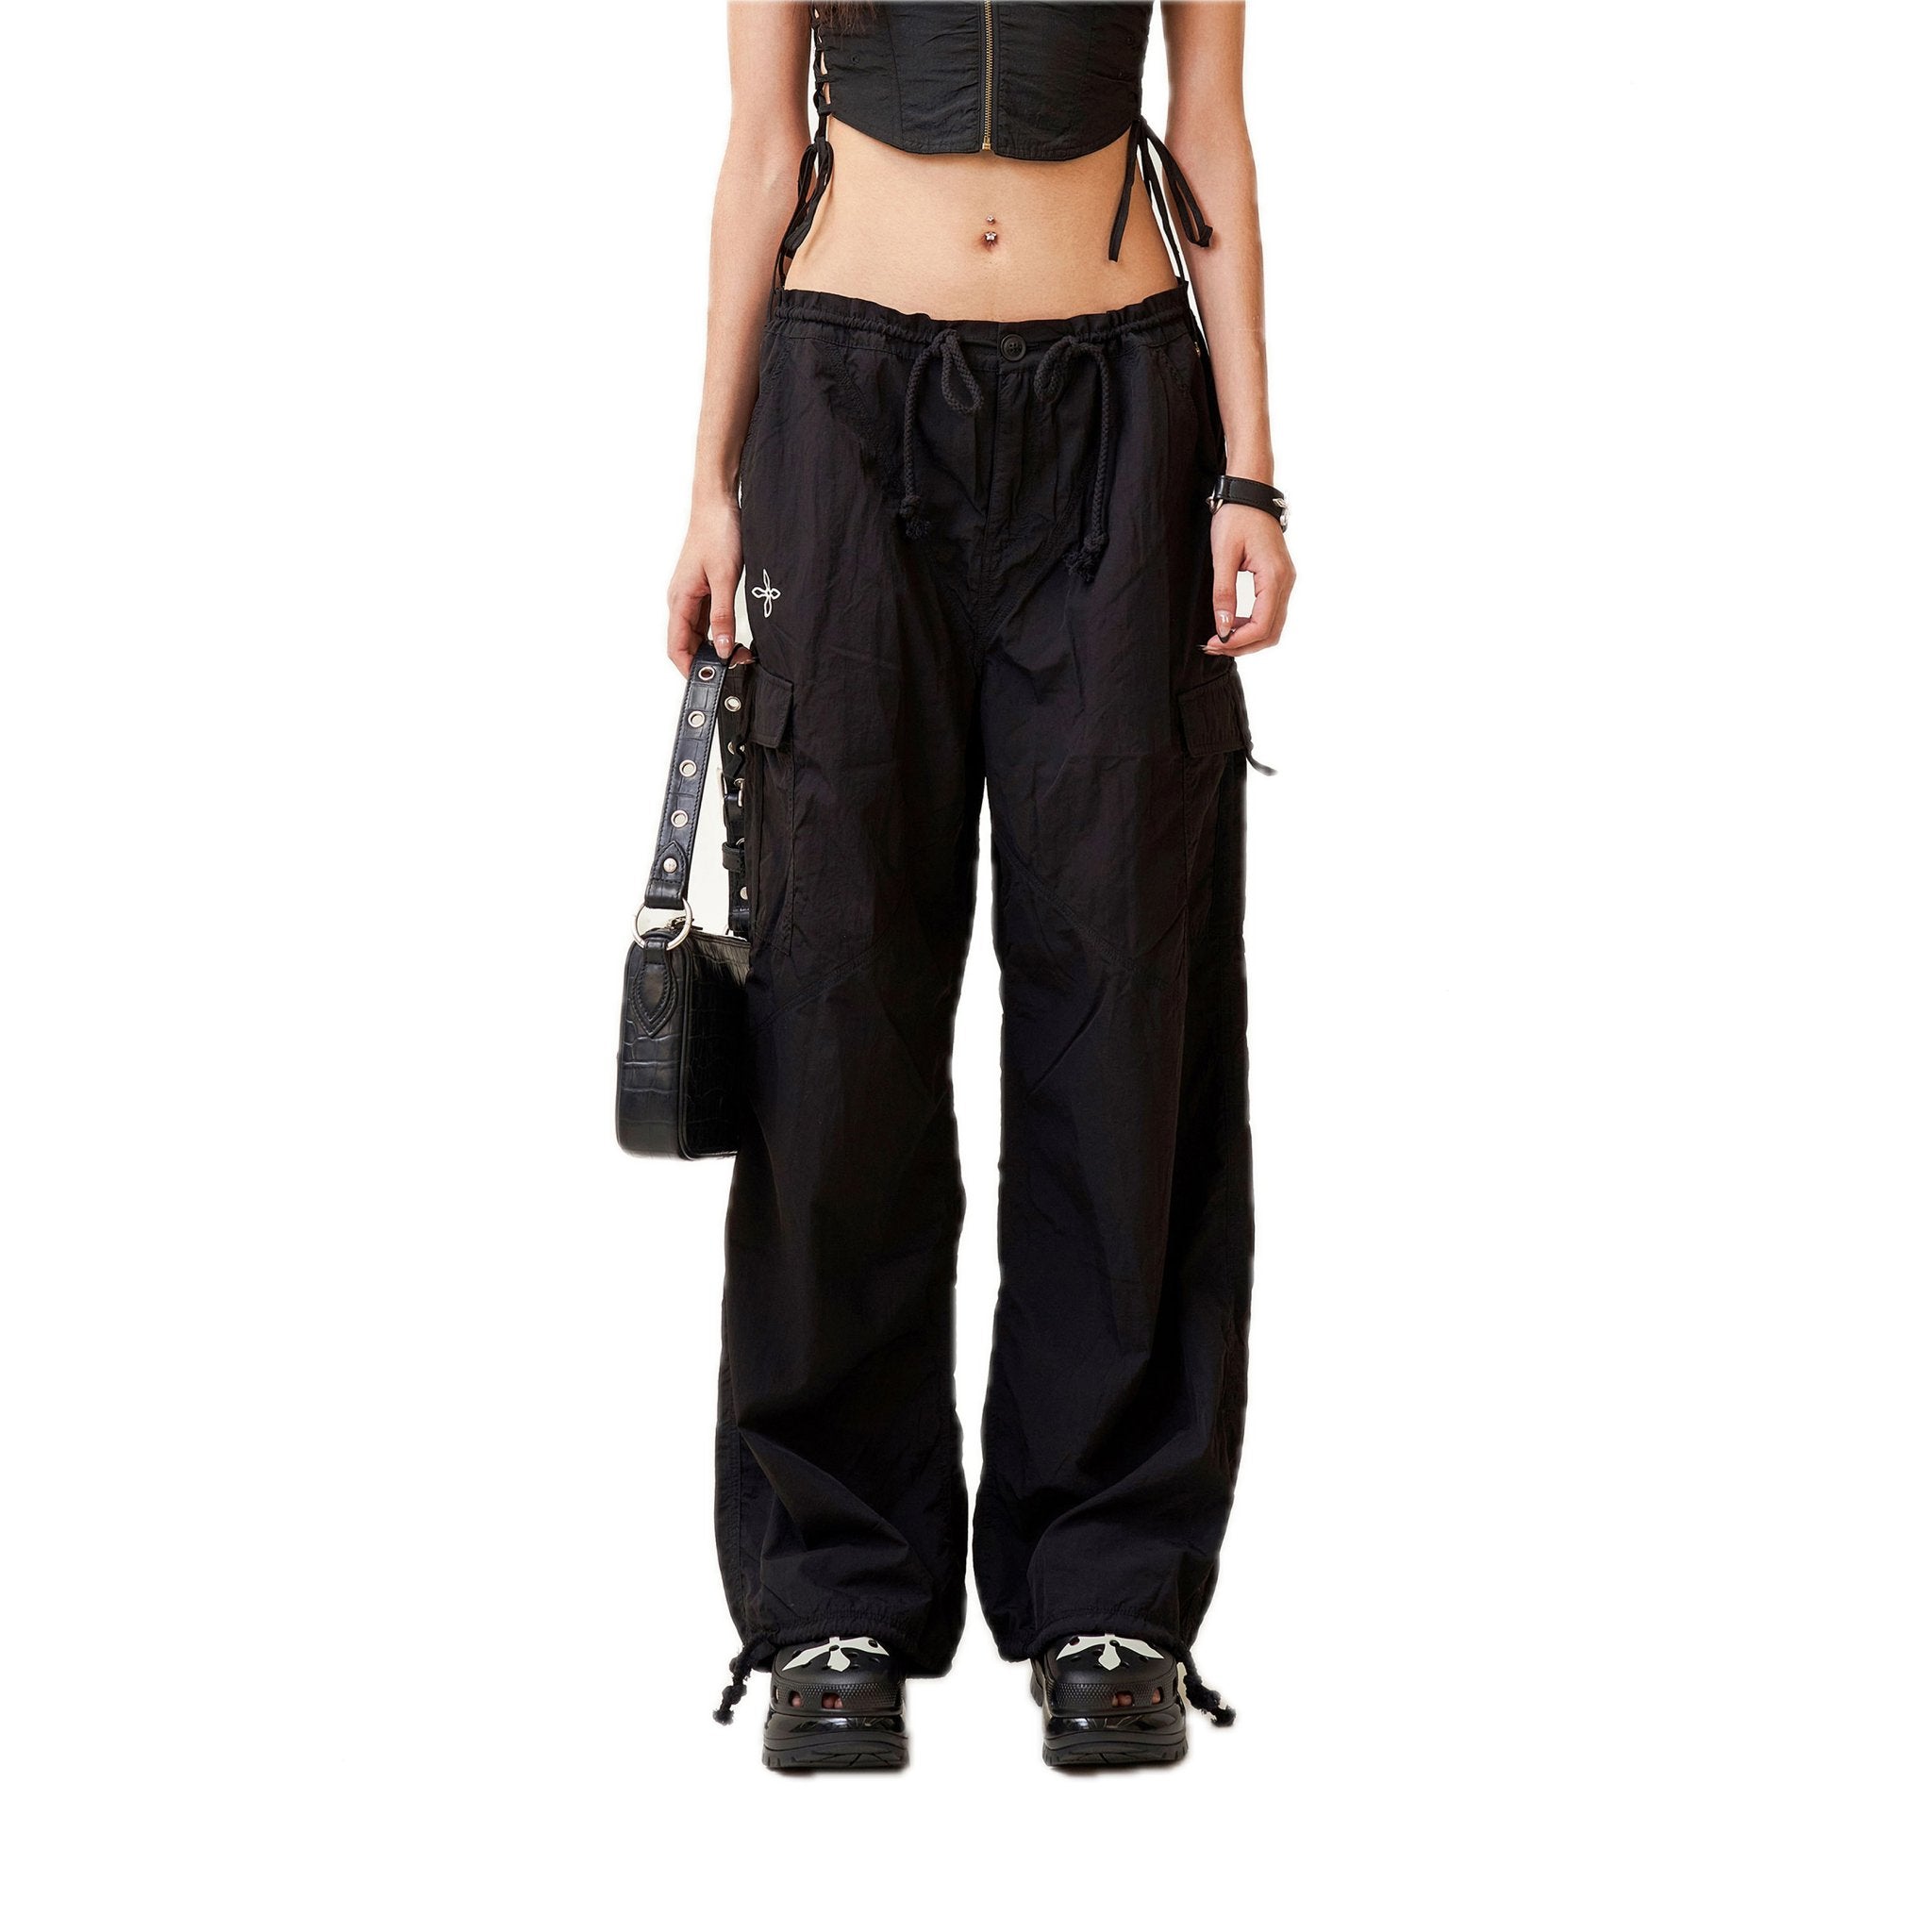 SMFK Compass Cross Classic Paratrooper Pants In Black | MADA IN CHINA